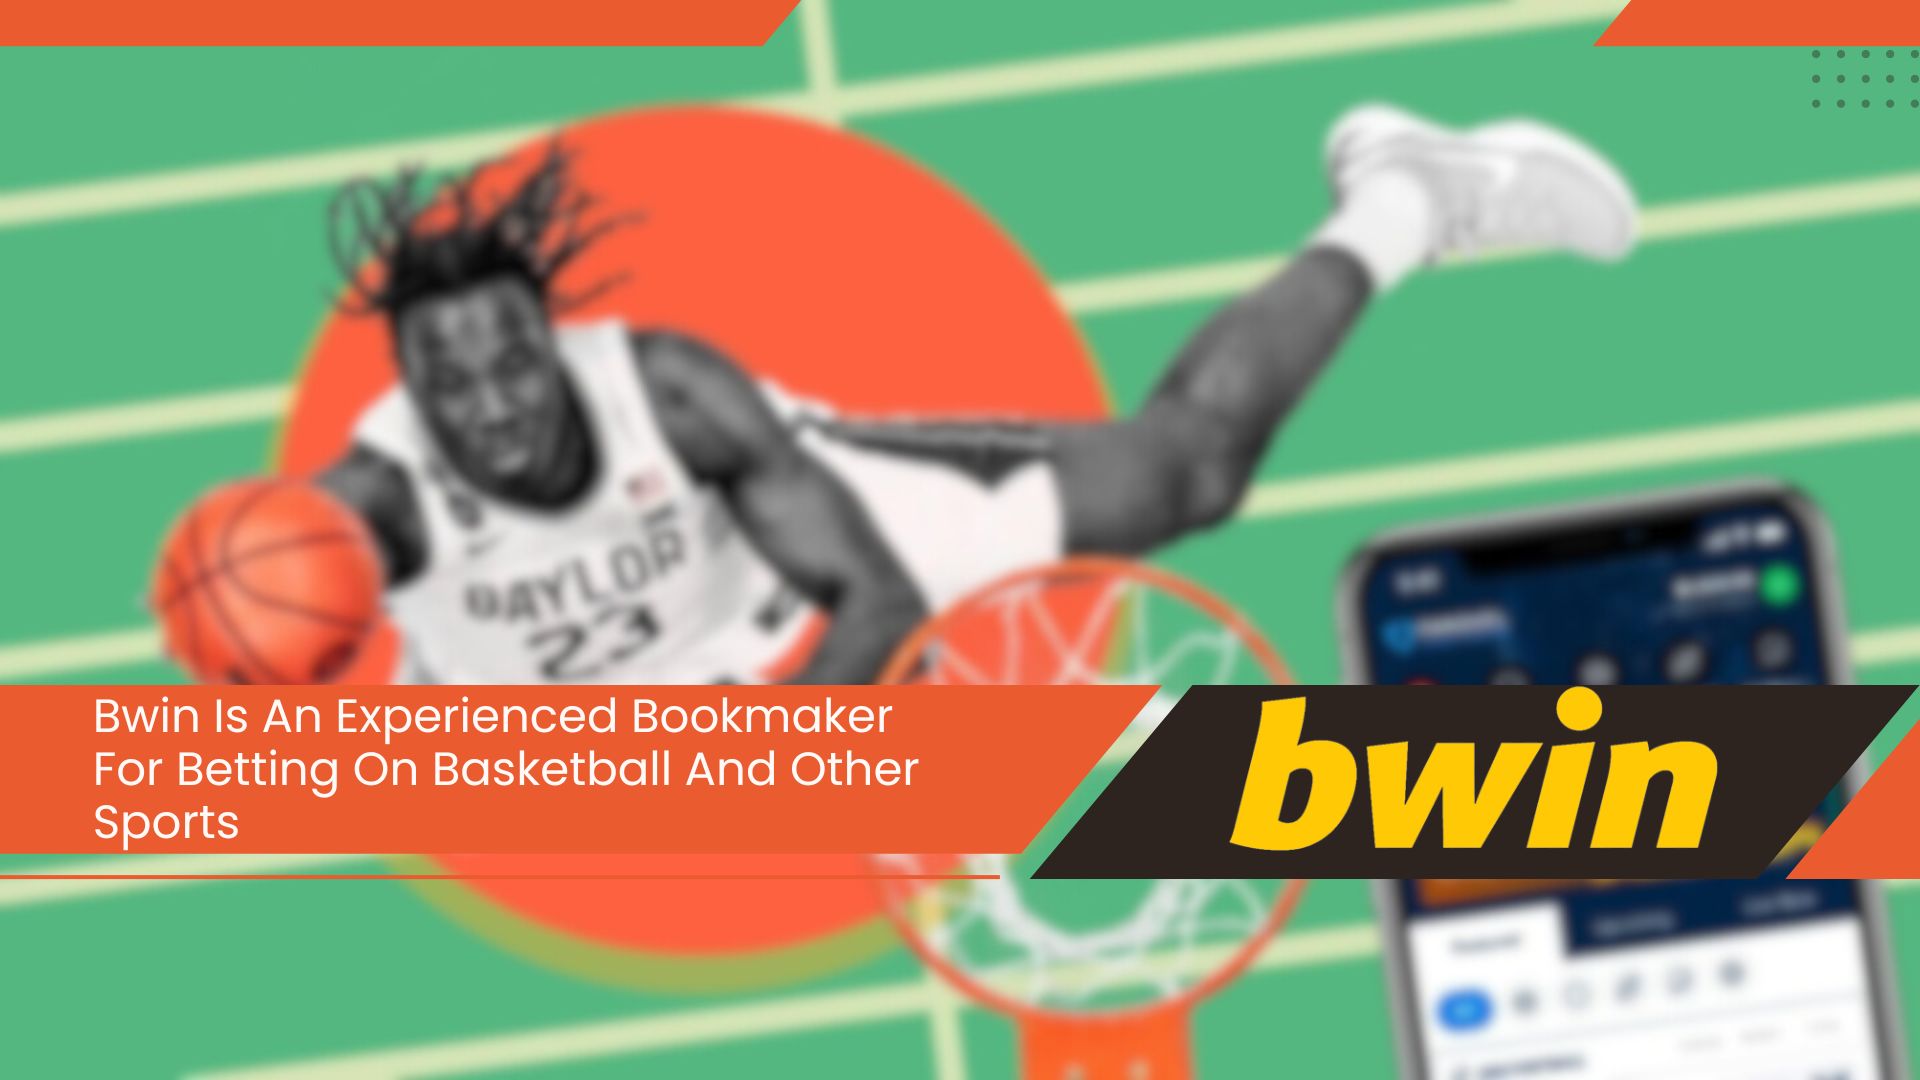 Bwin Is An Experienced Bookmaker For Betting On Basketball And Other Sports